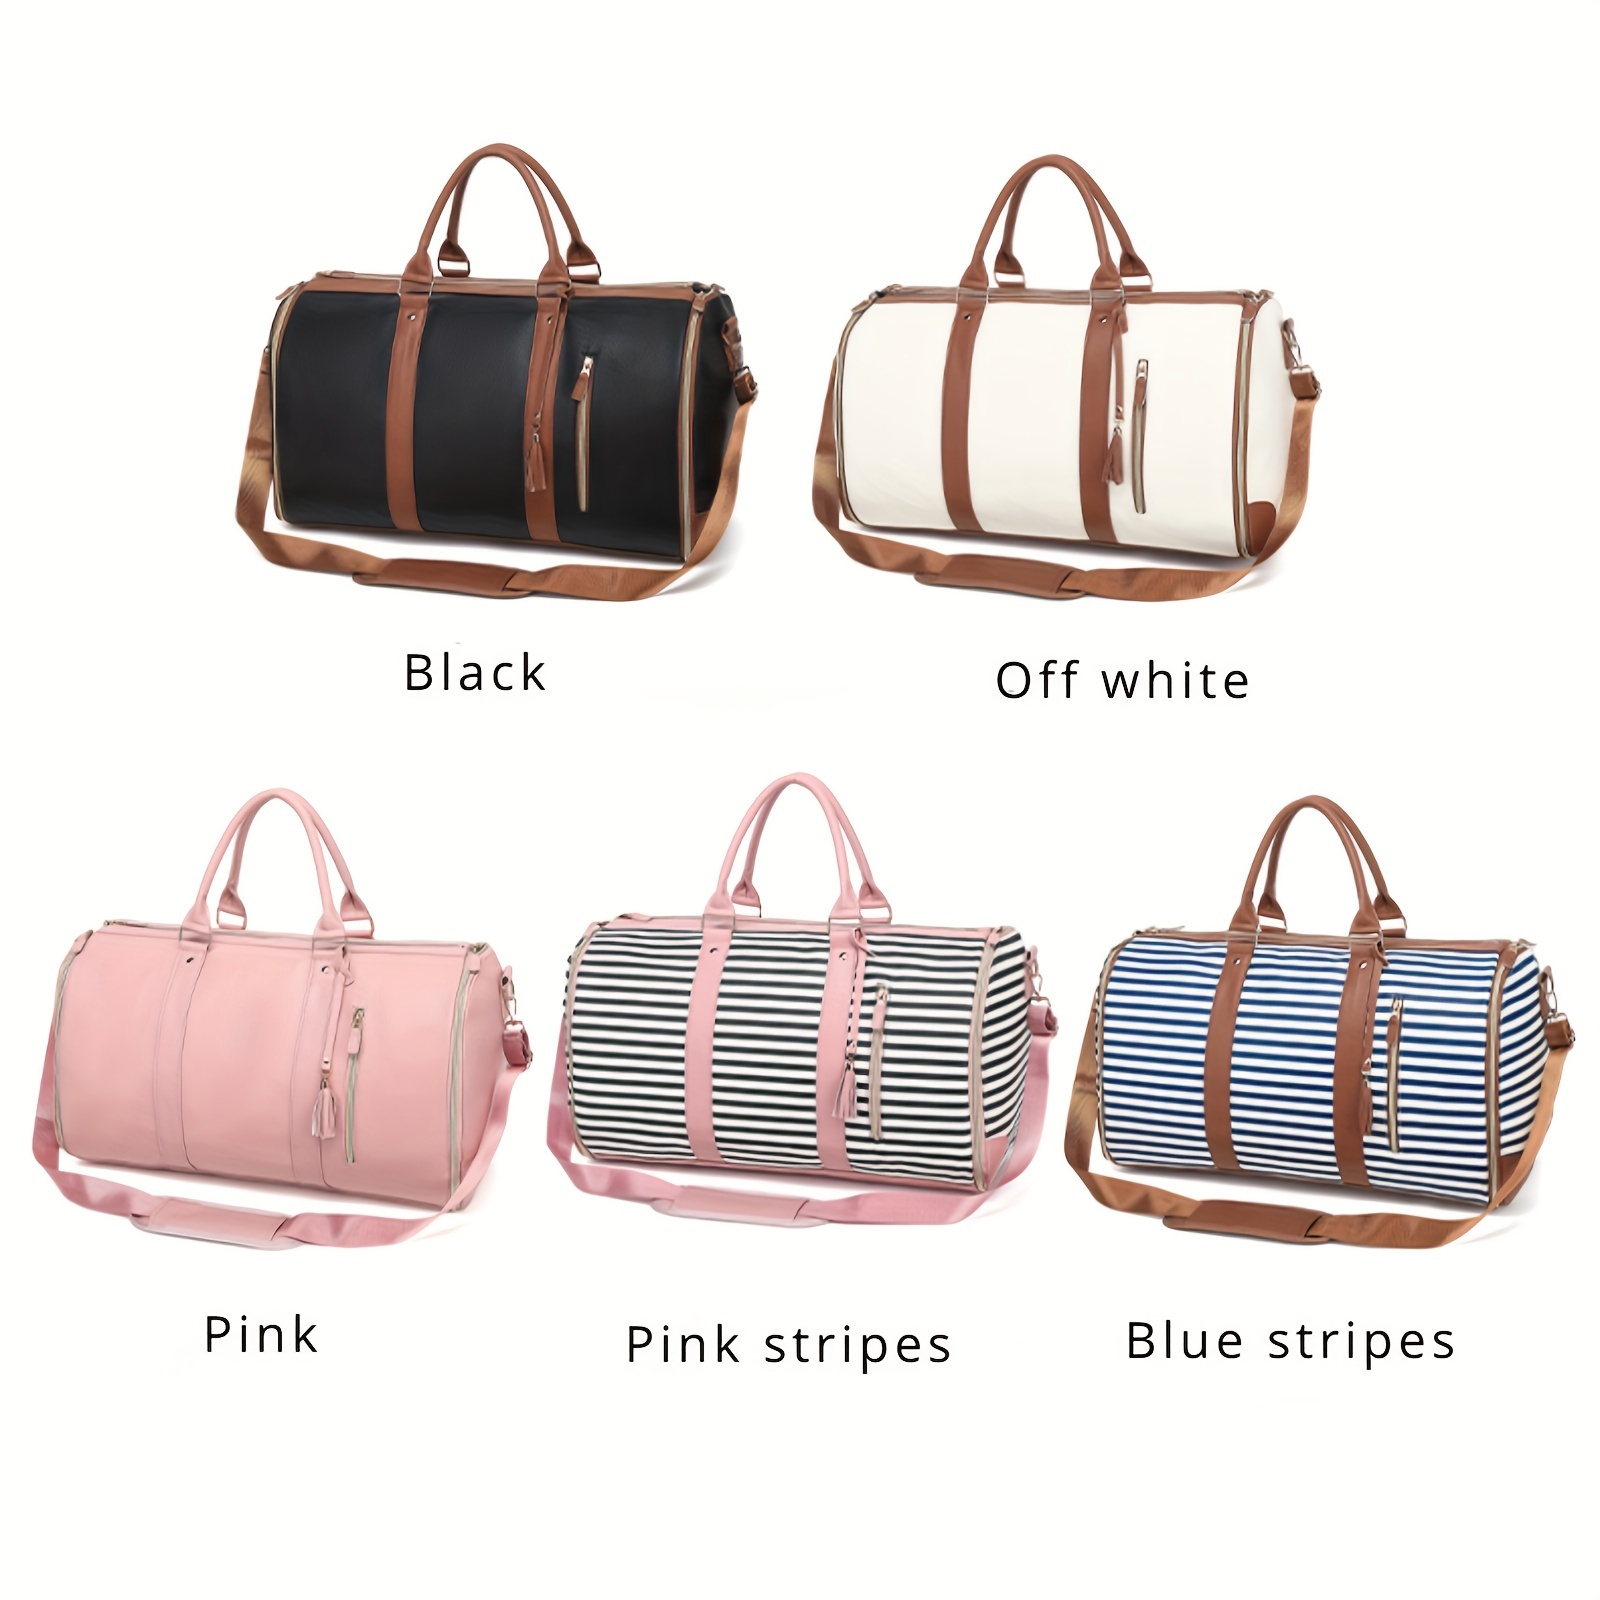 

Women's New Foldable Suit Travel Bag, Multi-functional Large Capacity Storage Tote, Hand-carry Luggage With Hanging Garment Compartment